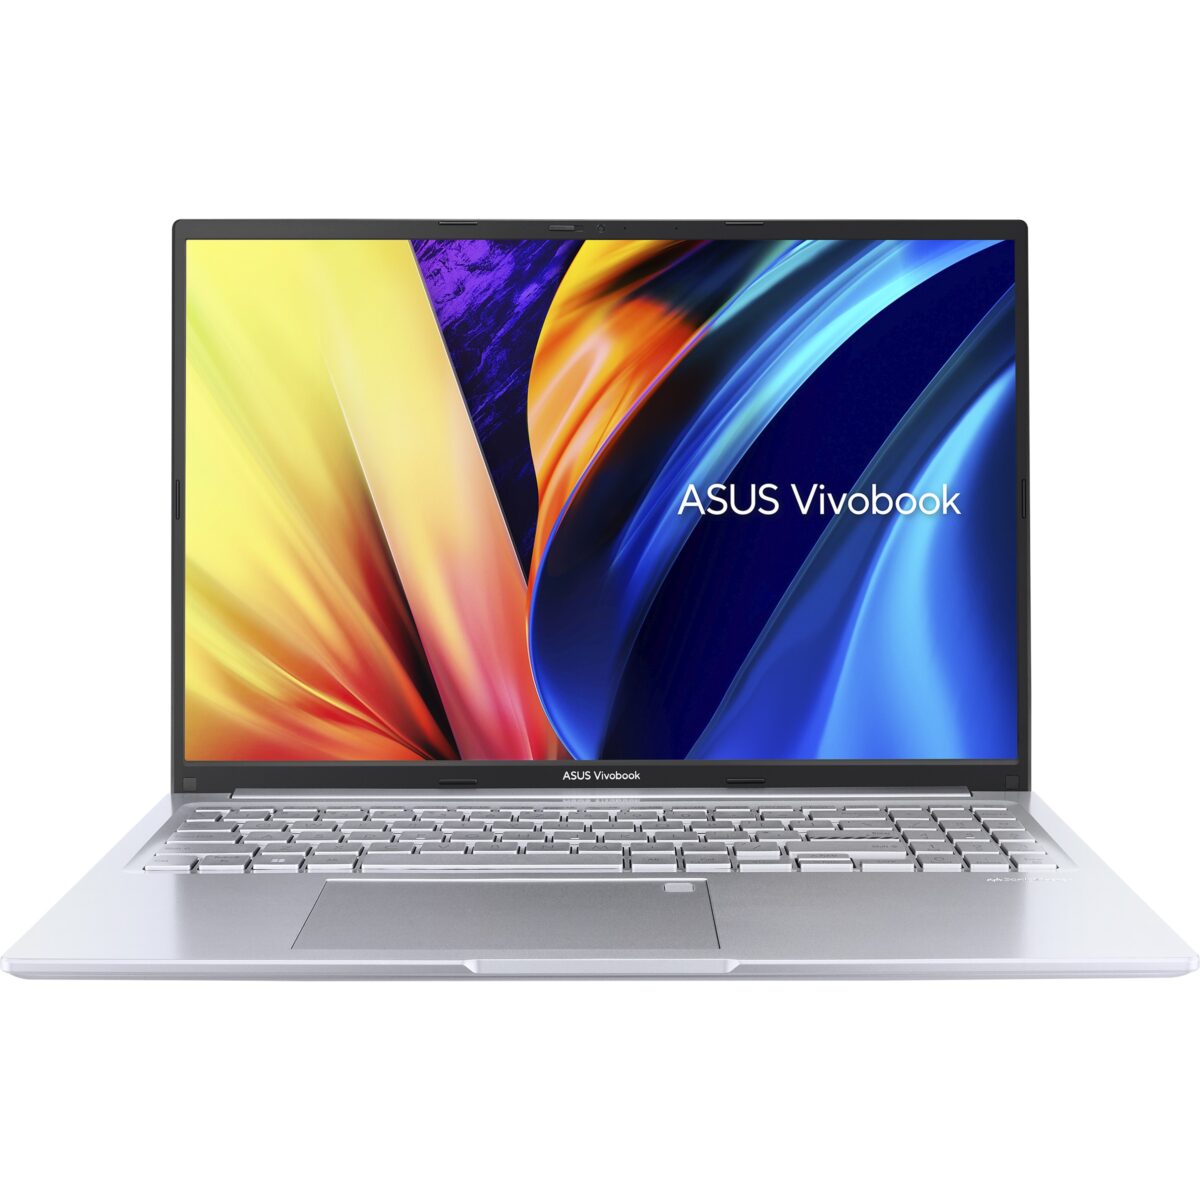 ASUS Vivobook 16X 2022 M1603QA-MB501WS Launched in India ( AMD Ryzen 5 5600H / 8GB ram / 512GB SSD )